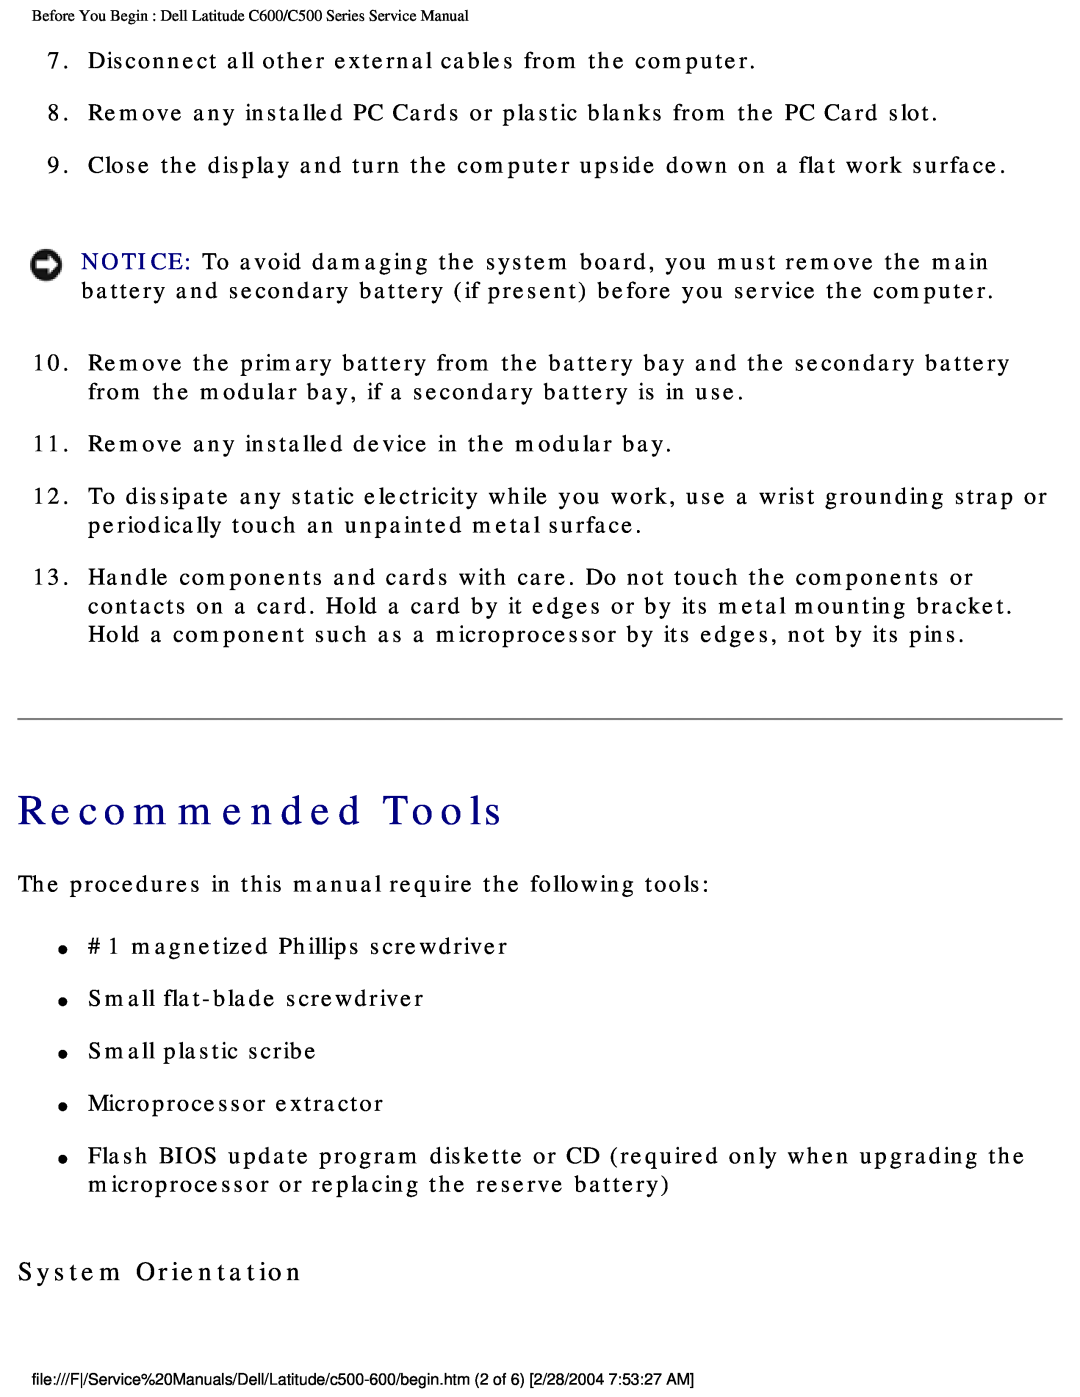 Dell C500 manual Recommended Tools, System Orientation 